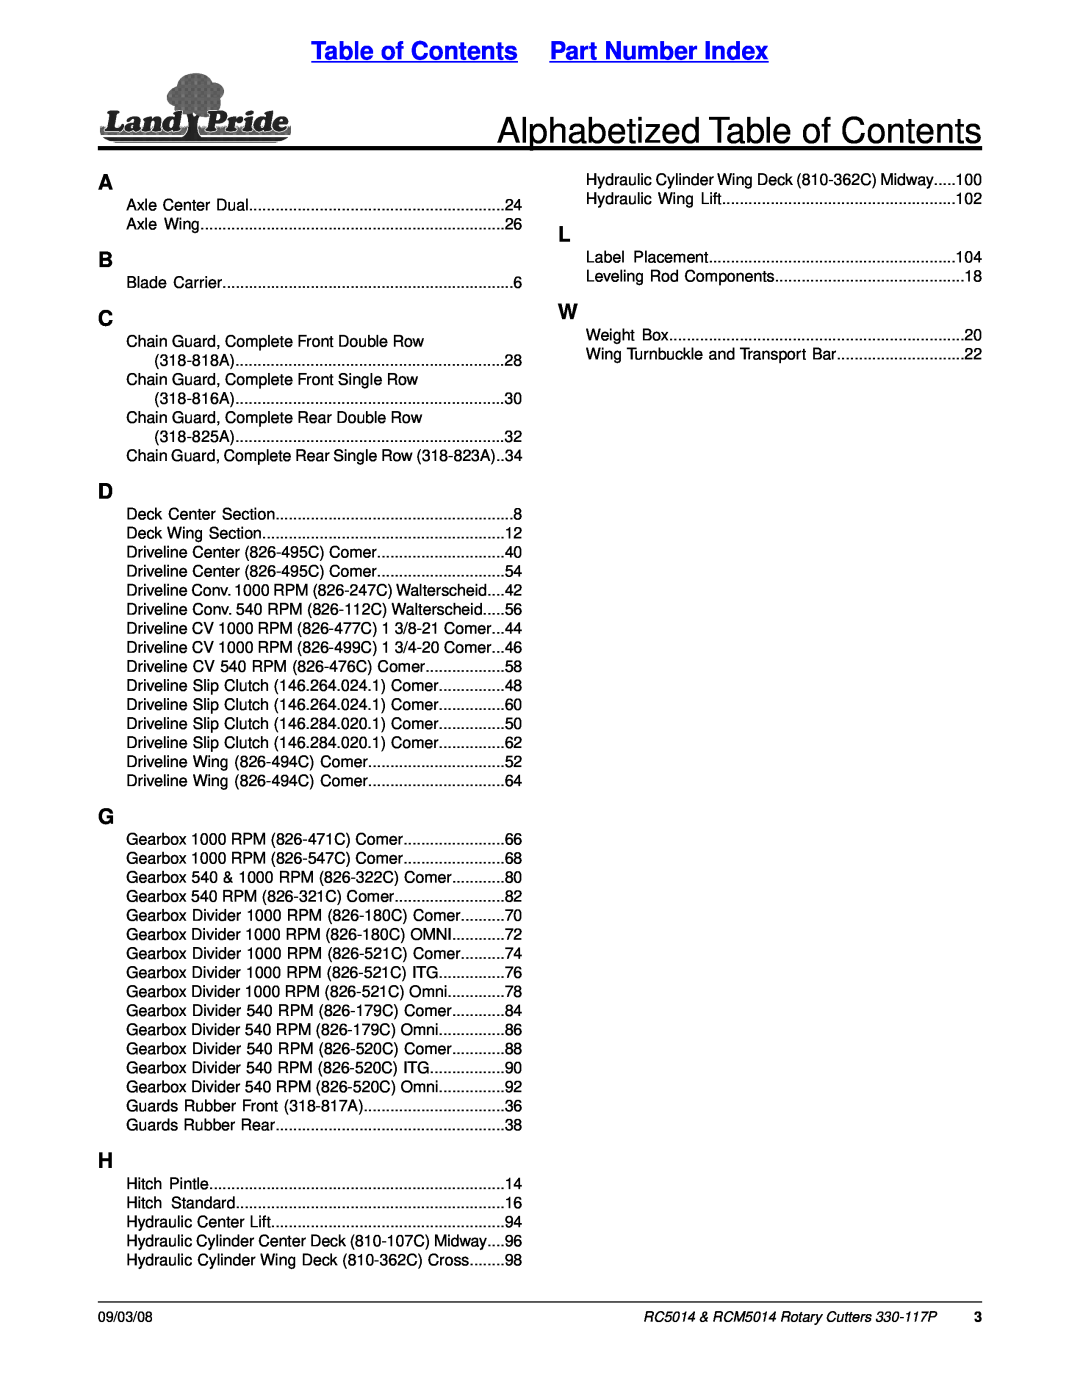 Land Pride RCM5014, RC5014 manual Part Number Index, Alphabetized Table of Contents 